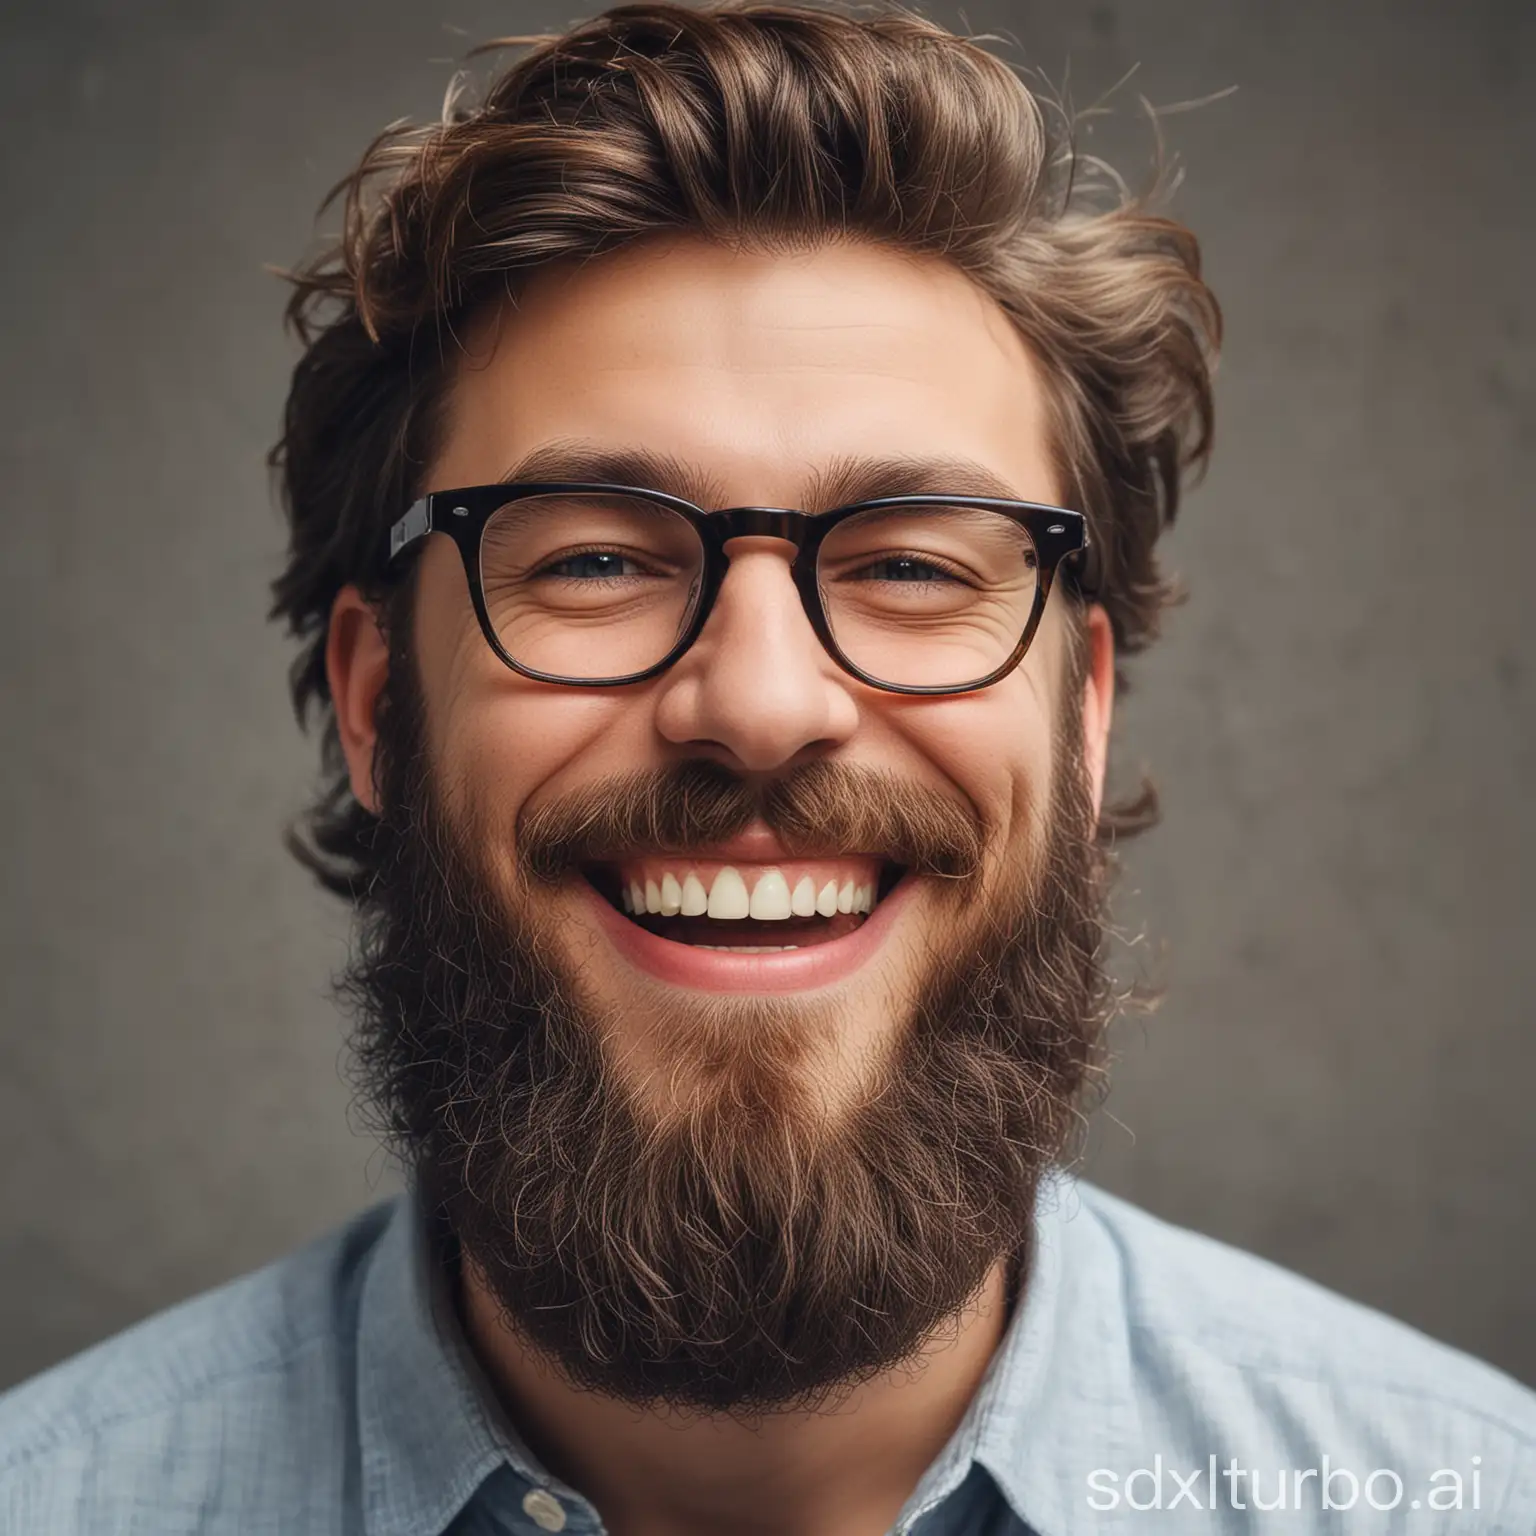 generate a bearded guy smiling image wearing specs